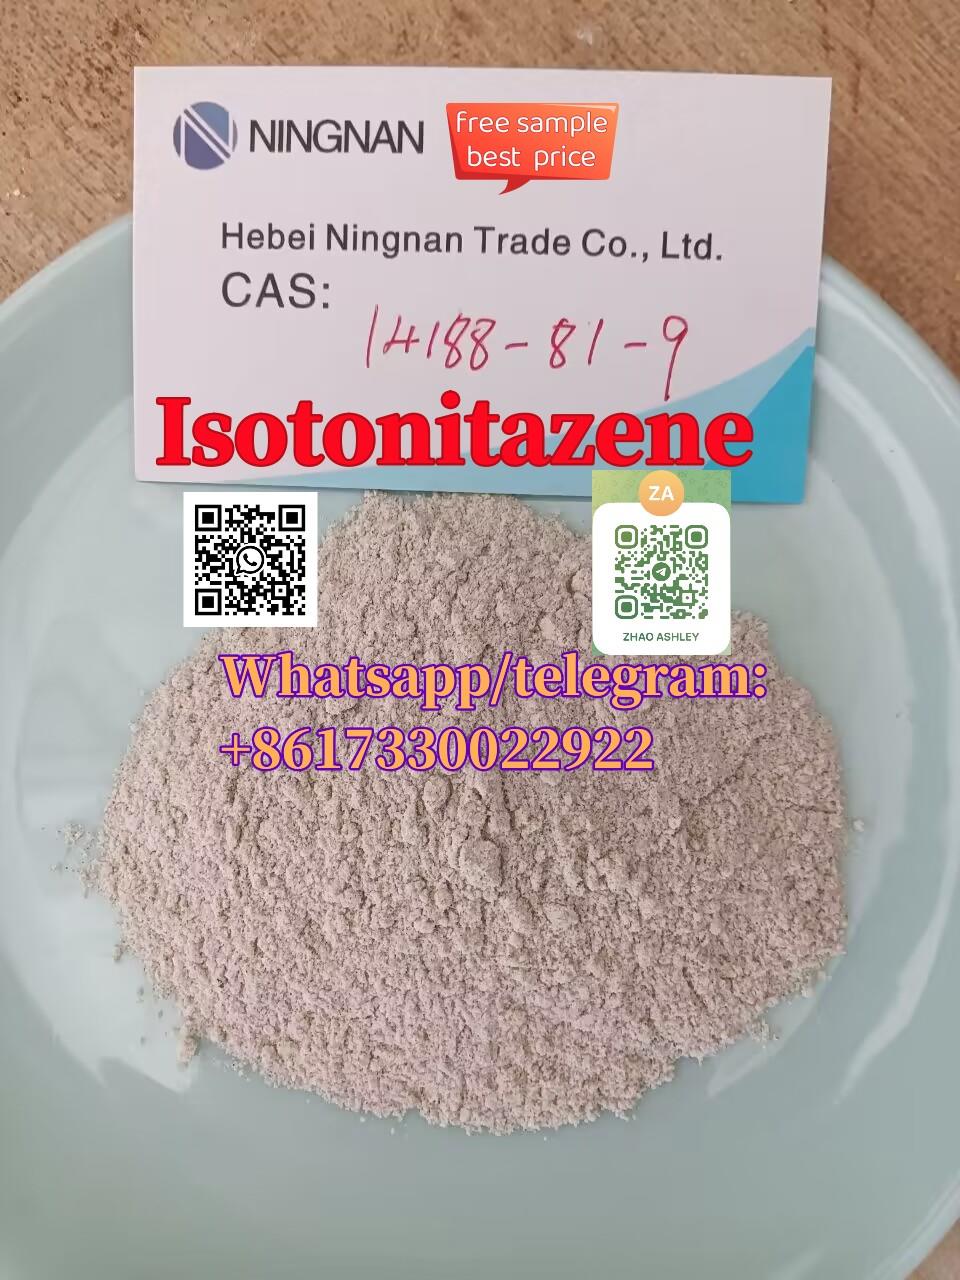 cas 14188-81-9 Isotonitazene 100% safe delivery!,14188-81-9 Isotonitazene,ningnan ,Electrical and Power Generation/Batteries